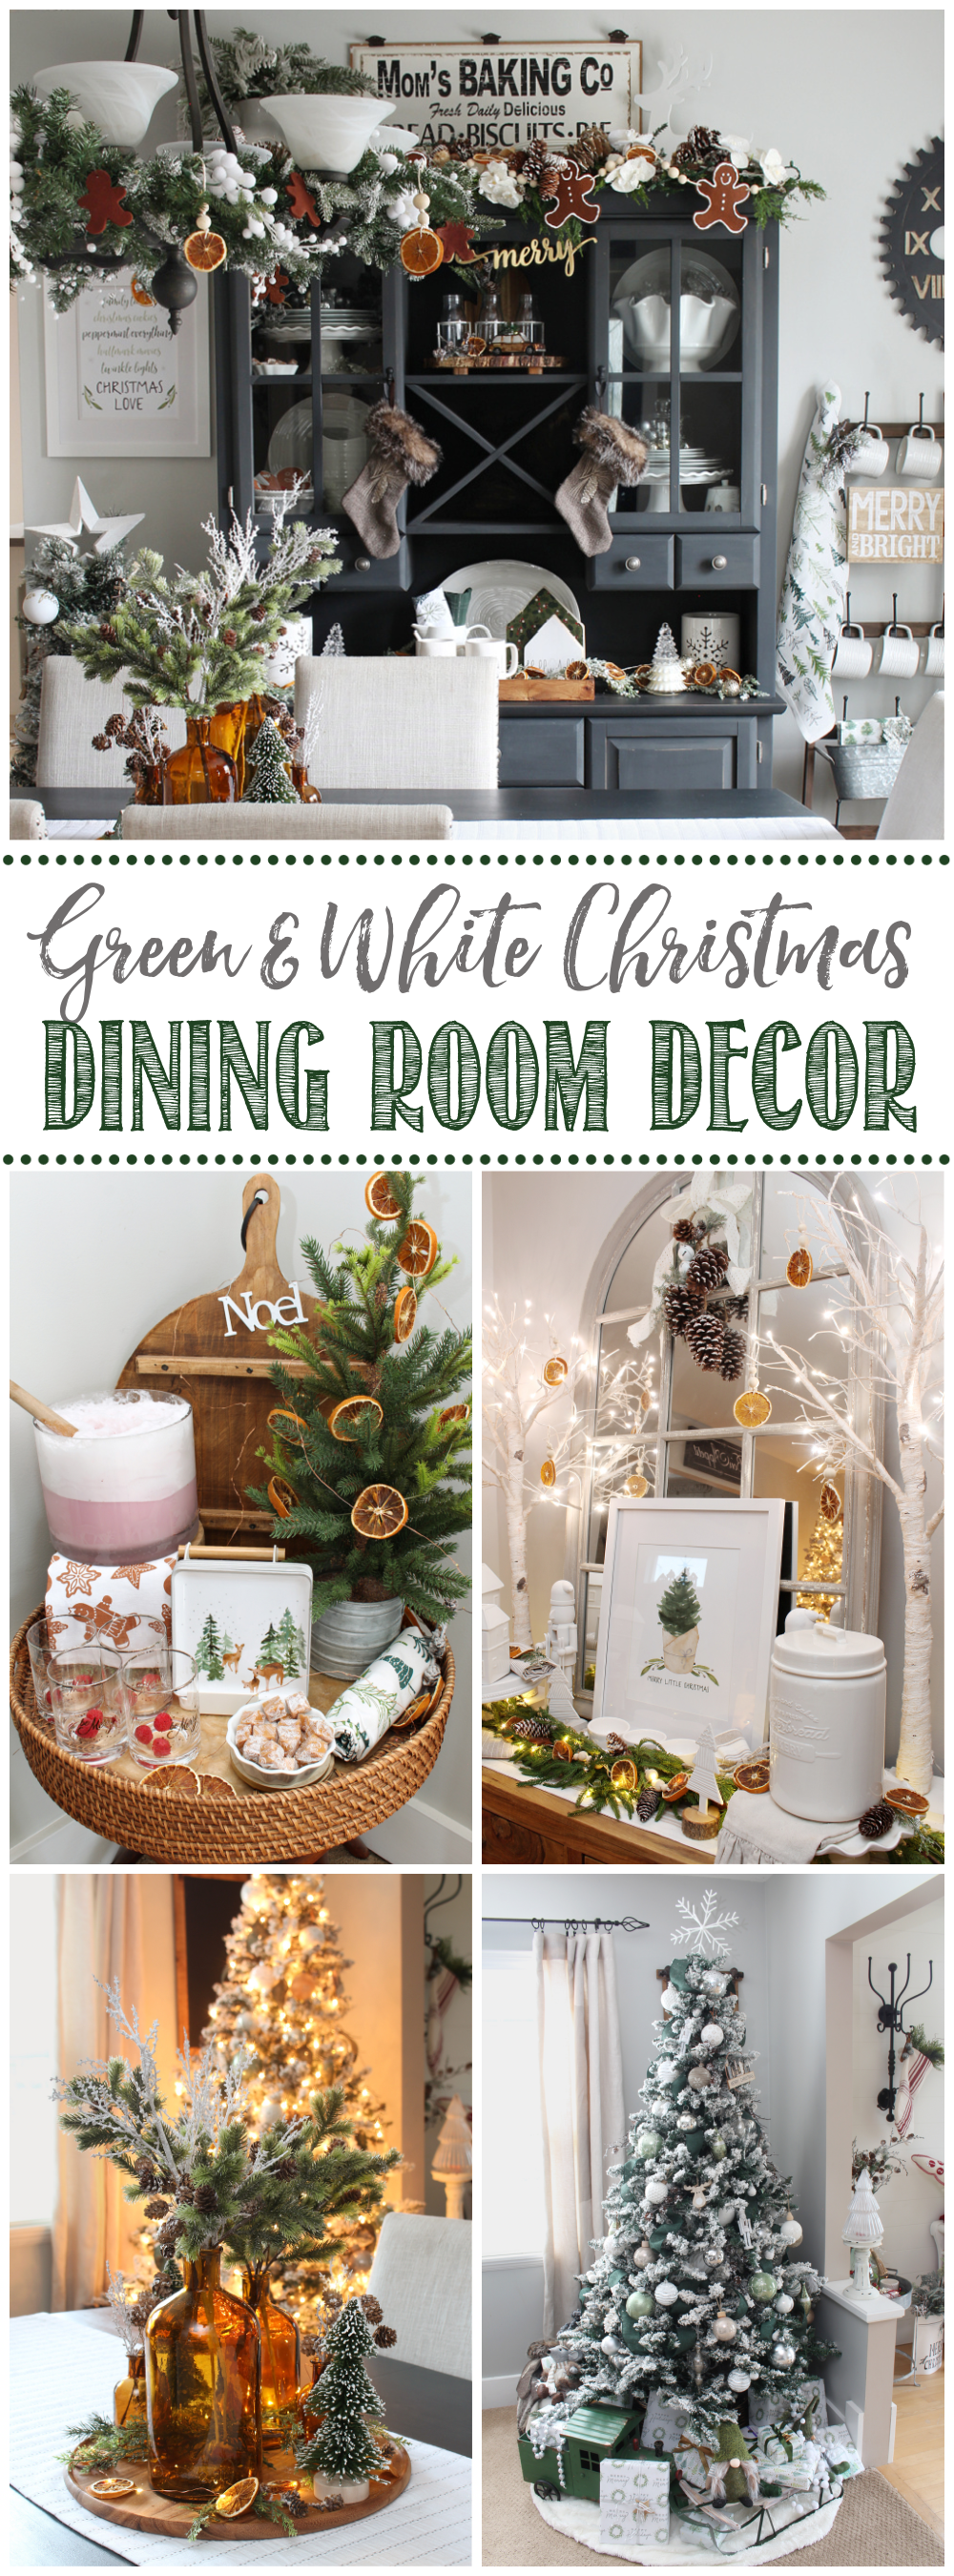 Collage of beautiful green and white Christmas dining room decor ideas.